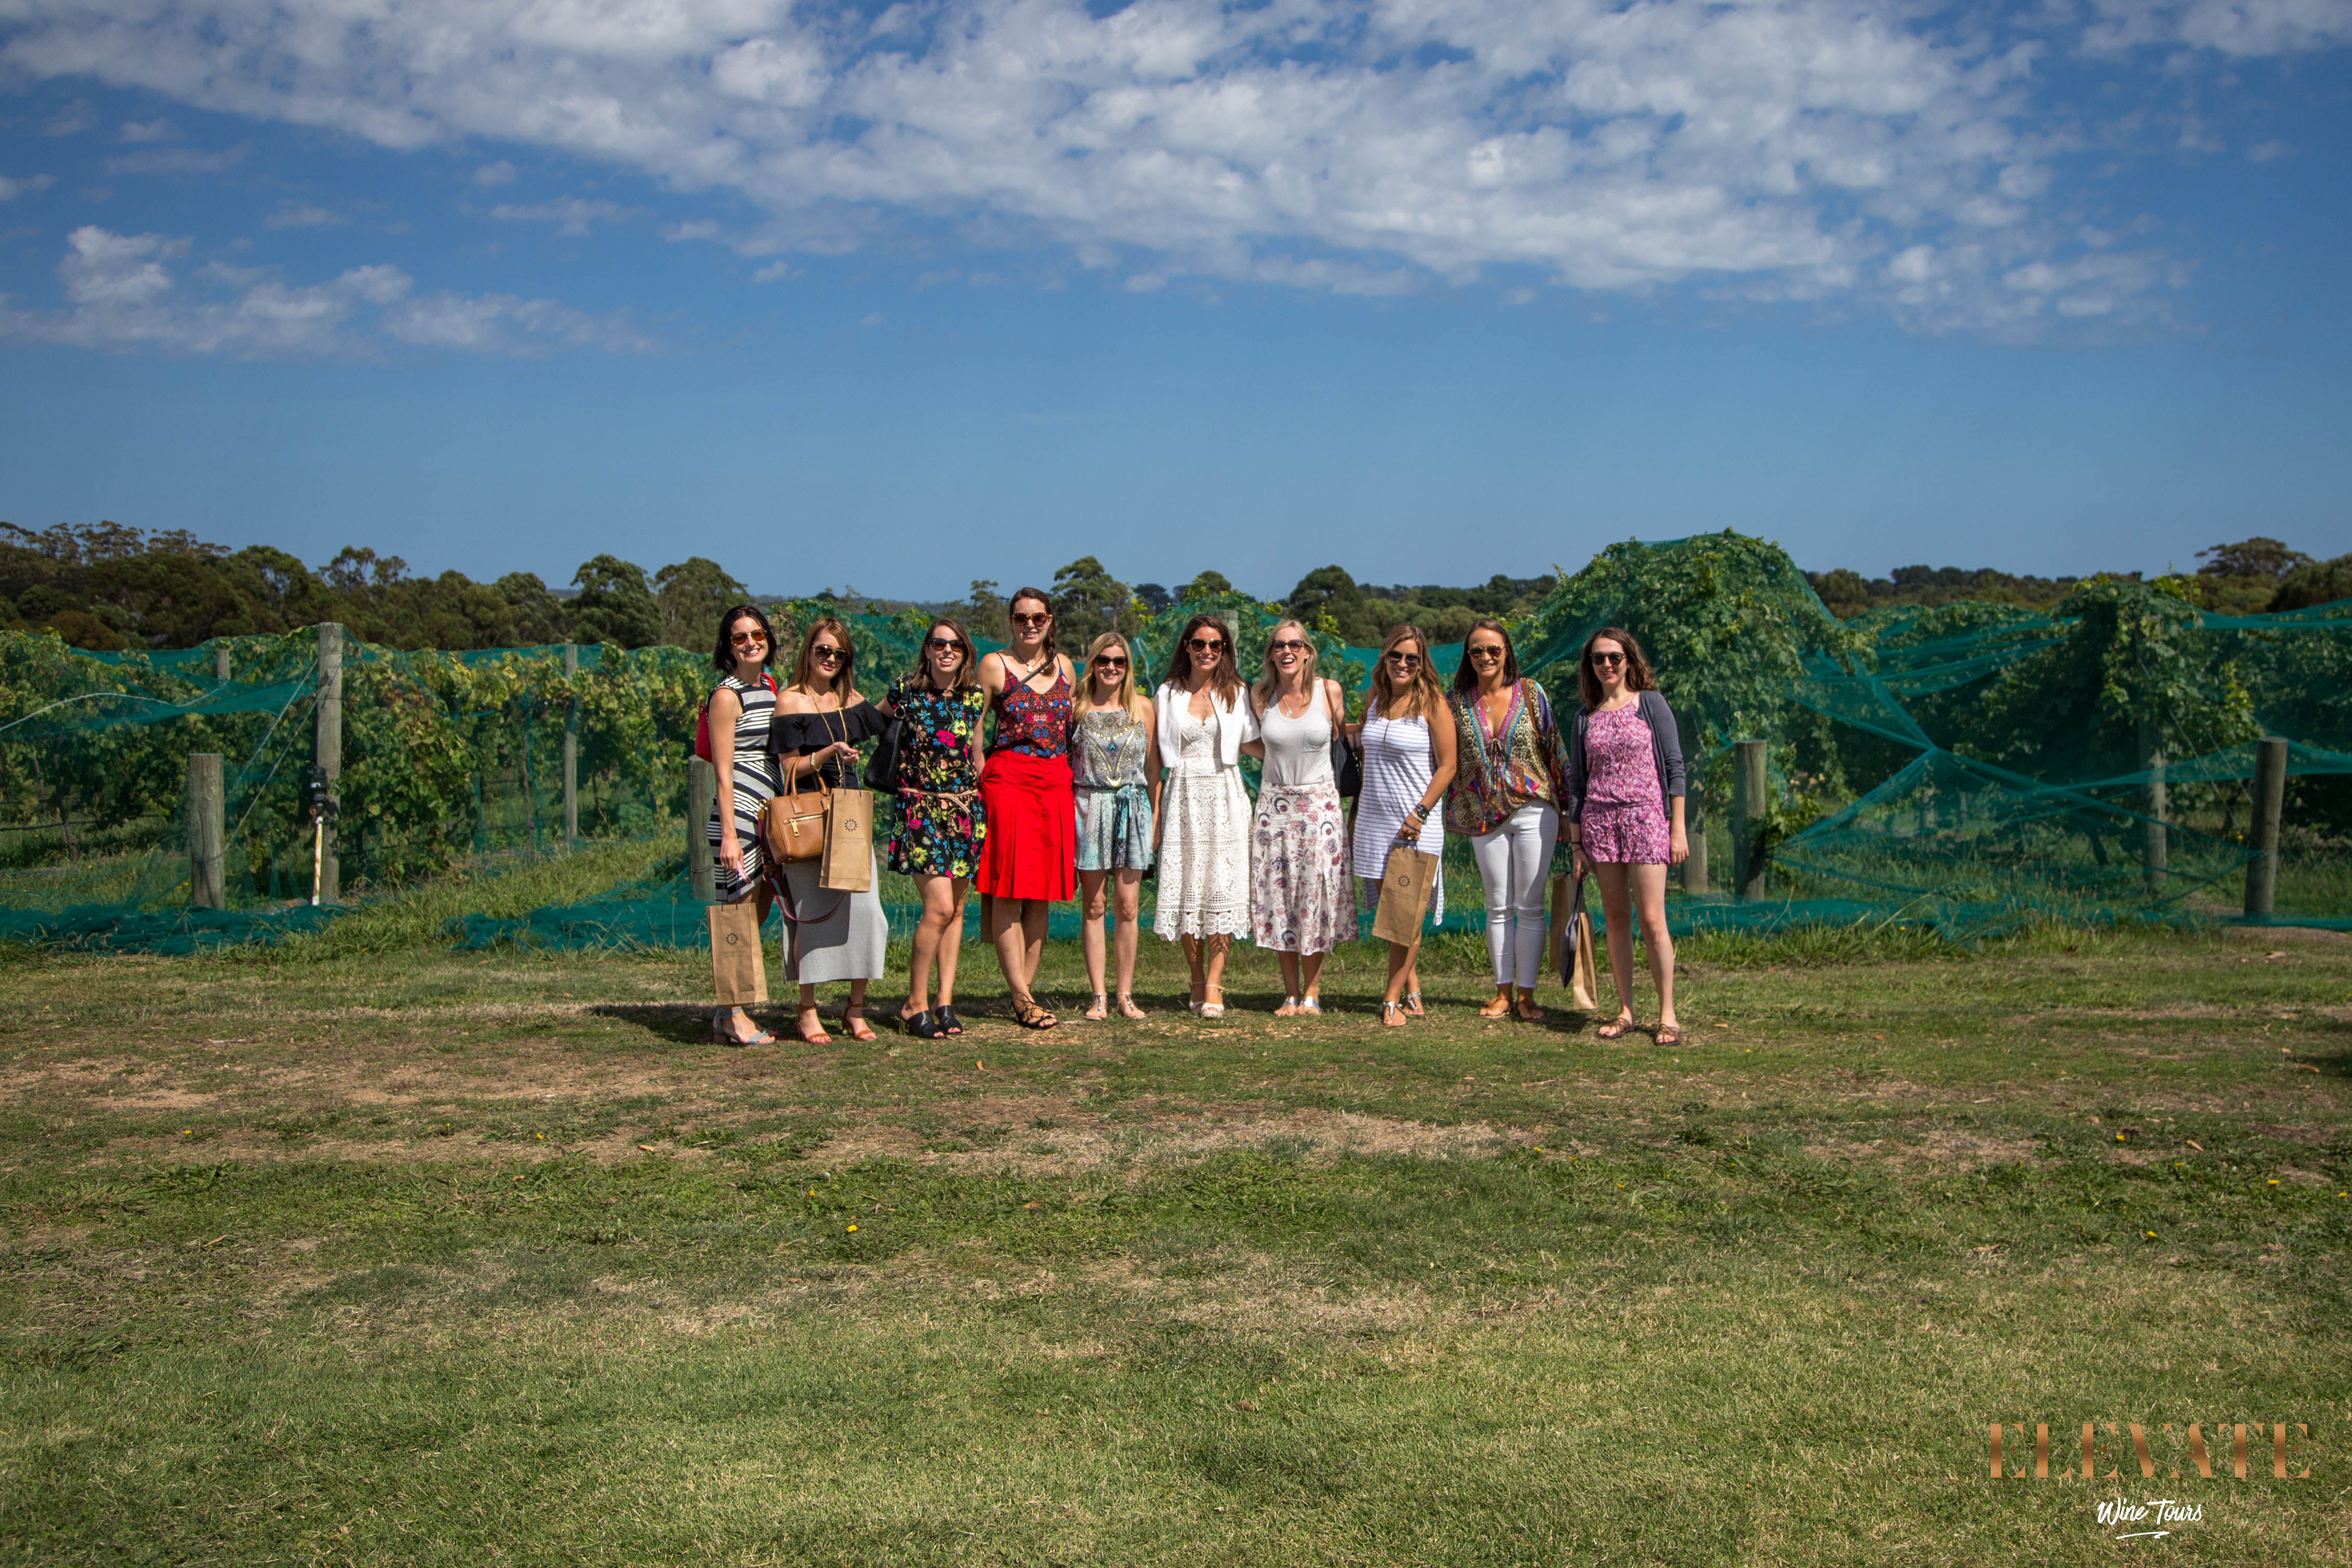 Standing in front of the vines at Stumpy Gully Vineyard